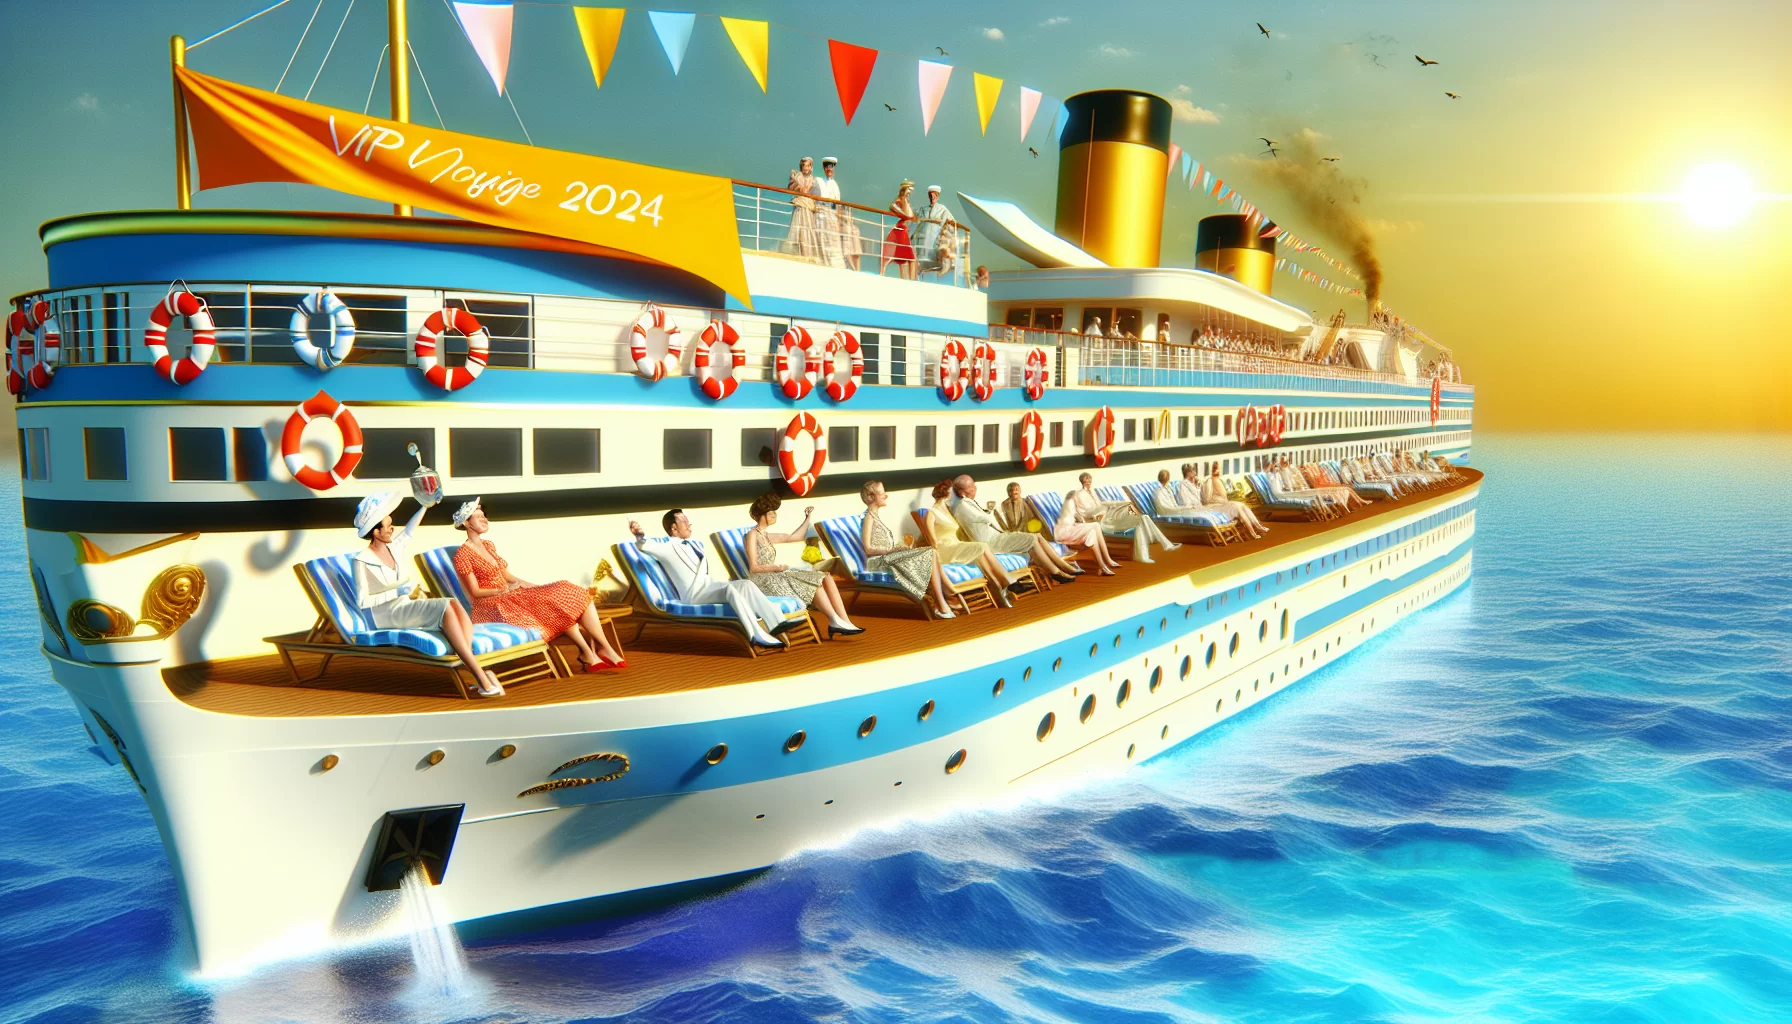 Embarking on luxury and nostalgia: an exclusive look at Princess Cruise Line's Love boat-themed VIP voyage in 2024